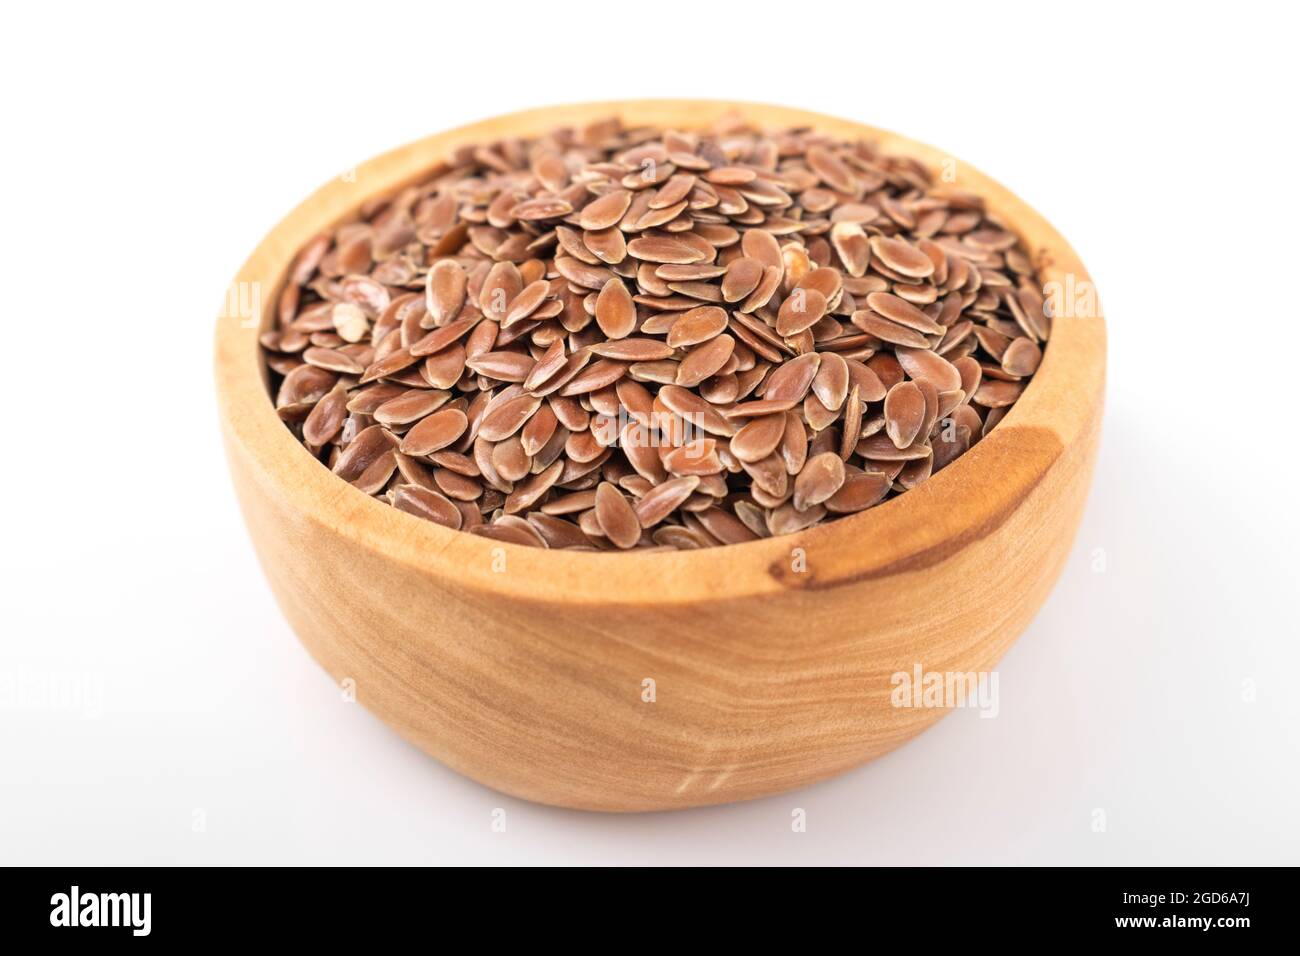 flax seed. flax seed in wooden bowl on white background. flax, seed. macro photo flax seed. Stock Photo